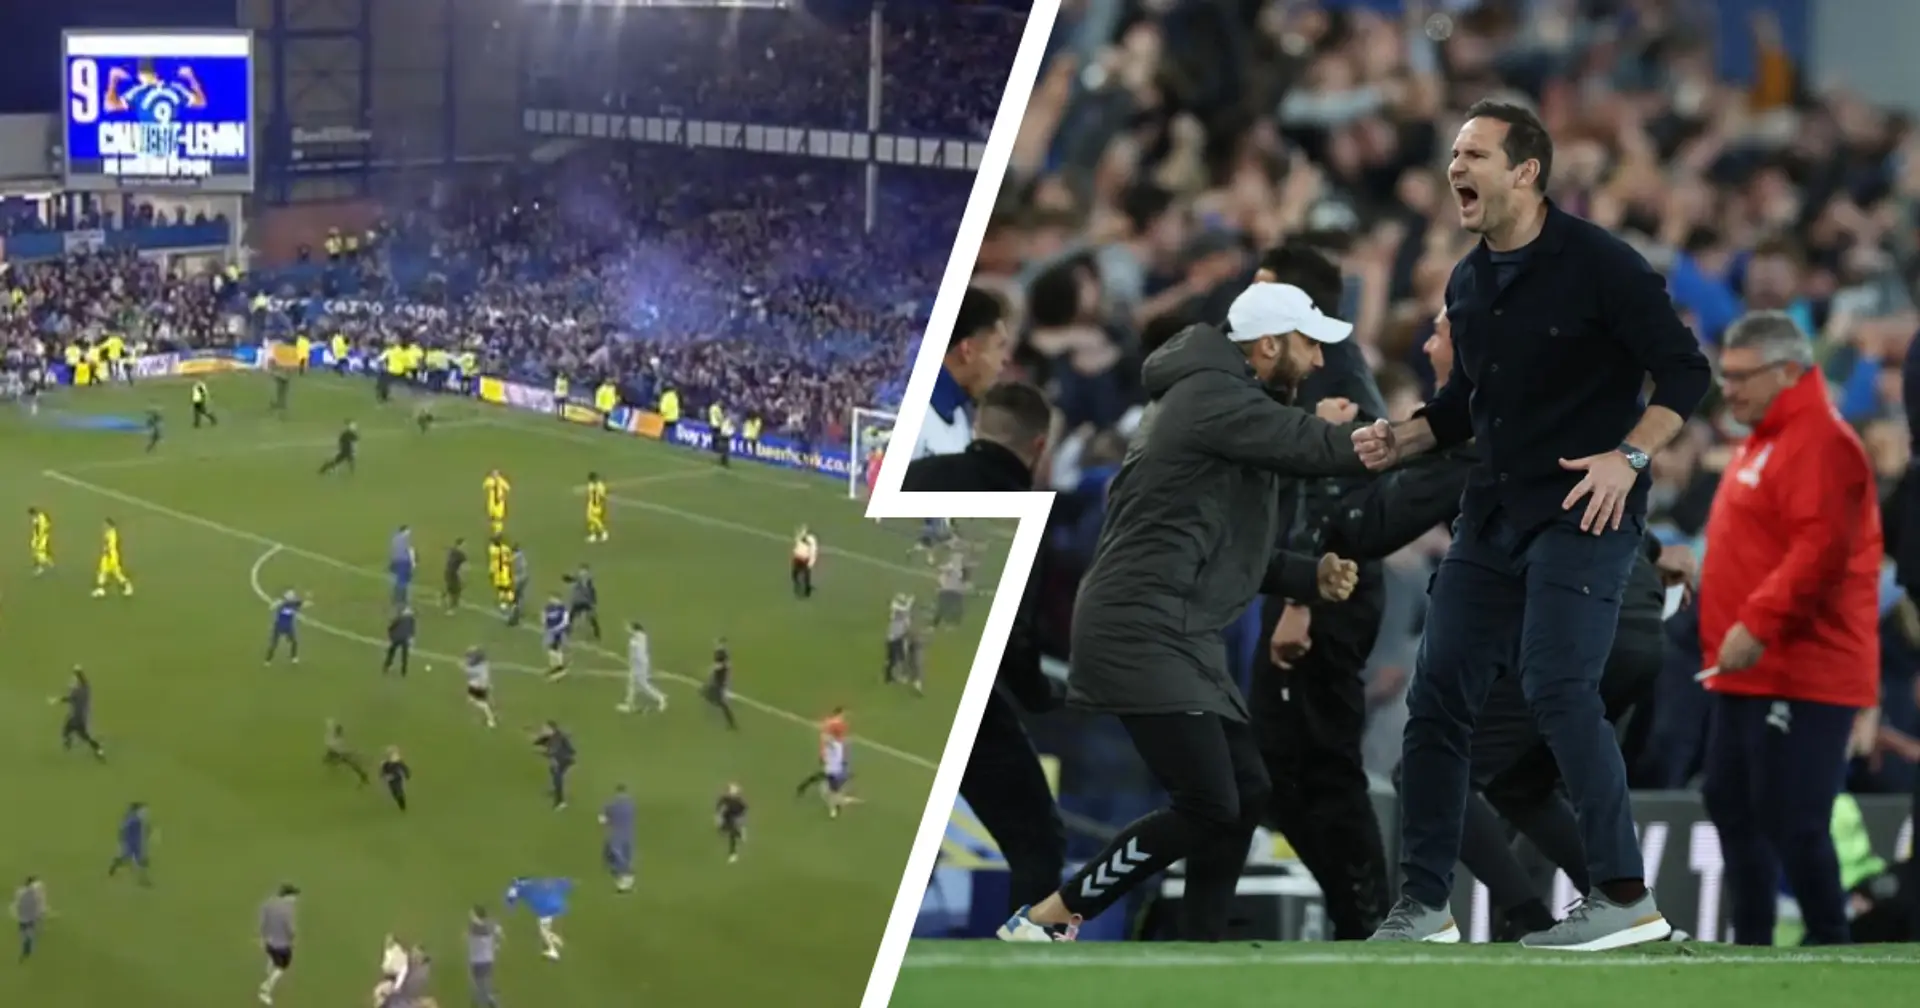 Everton beat Crystal Palace to avoid relegation, fans invade pitch after crucial goal